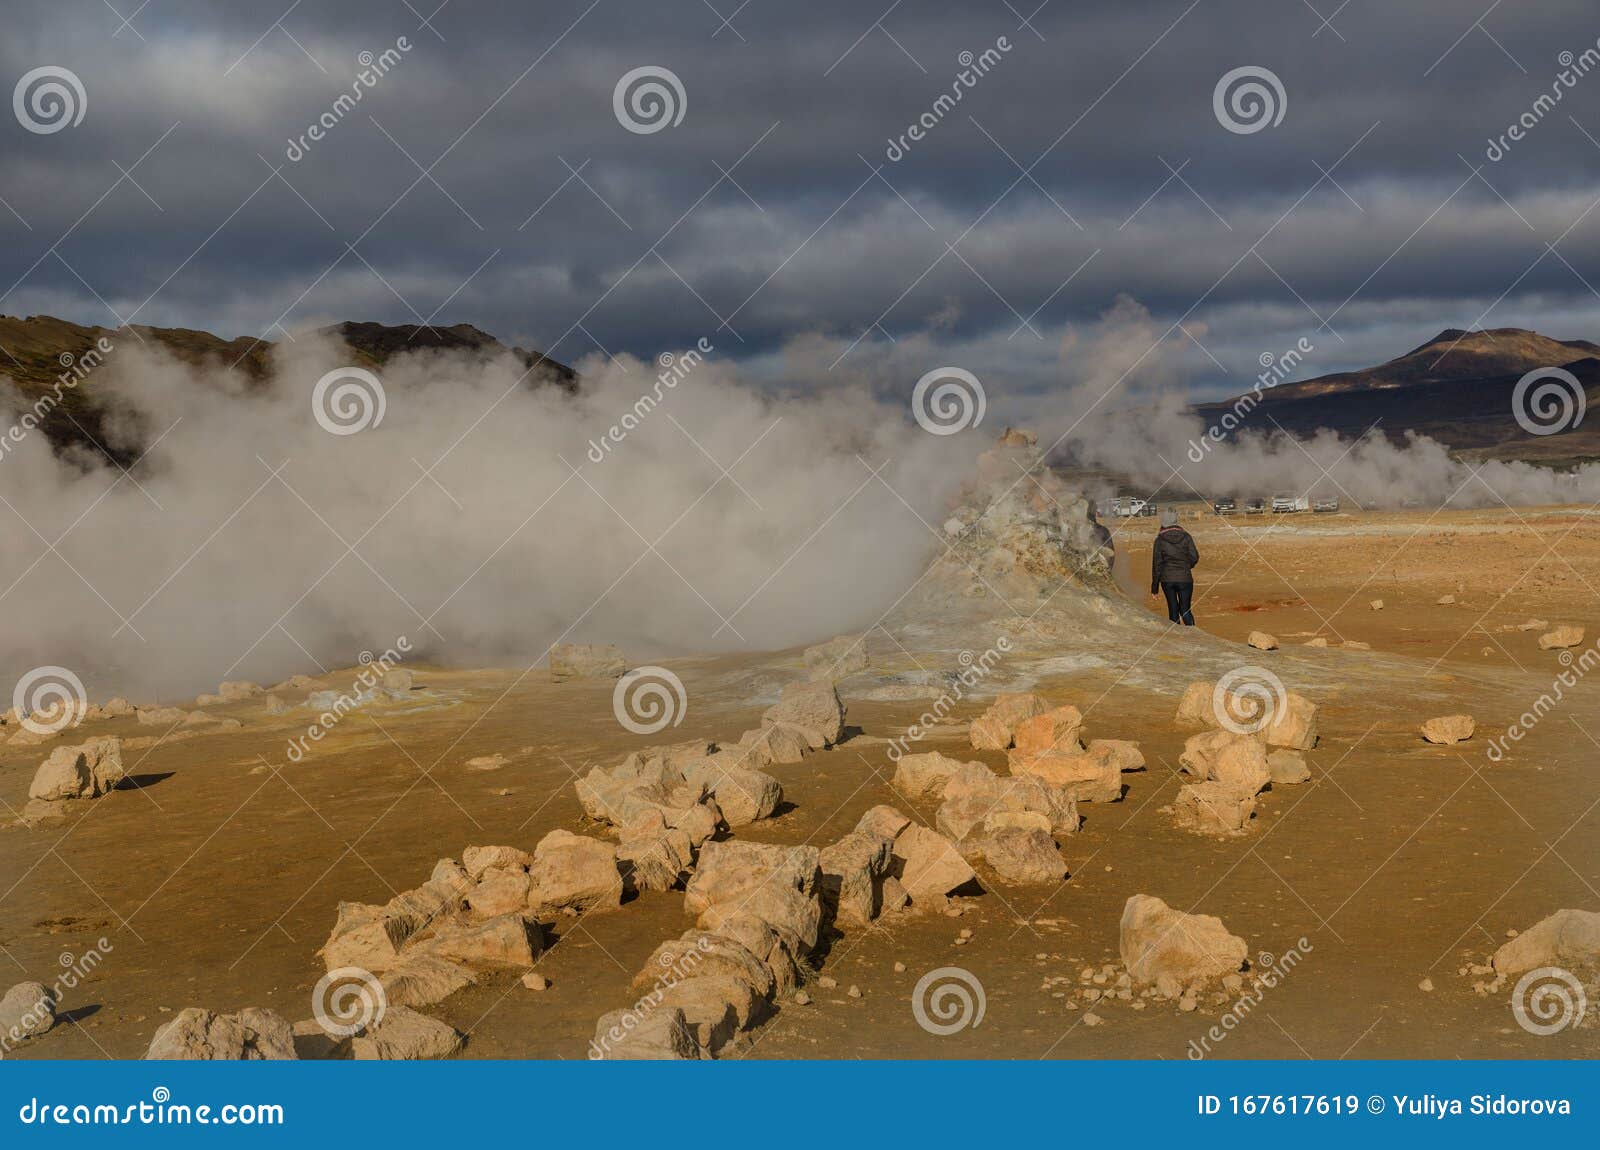 iceland, europe, hervir geyser valley enters the golden ring of the iceland tourist route, amazing and unearthly landscape